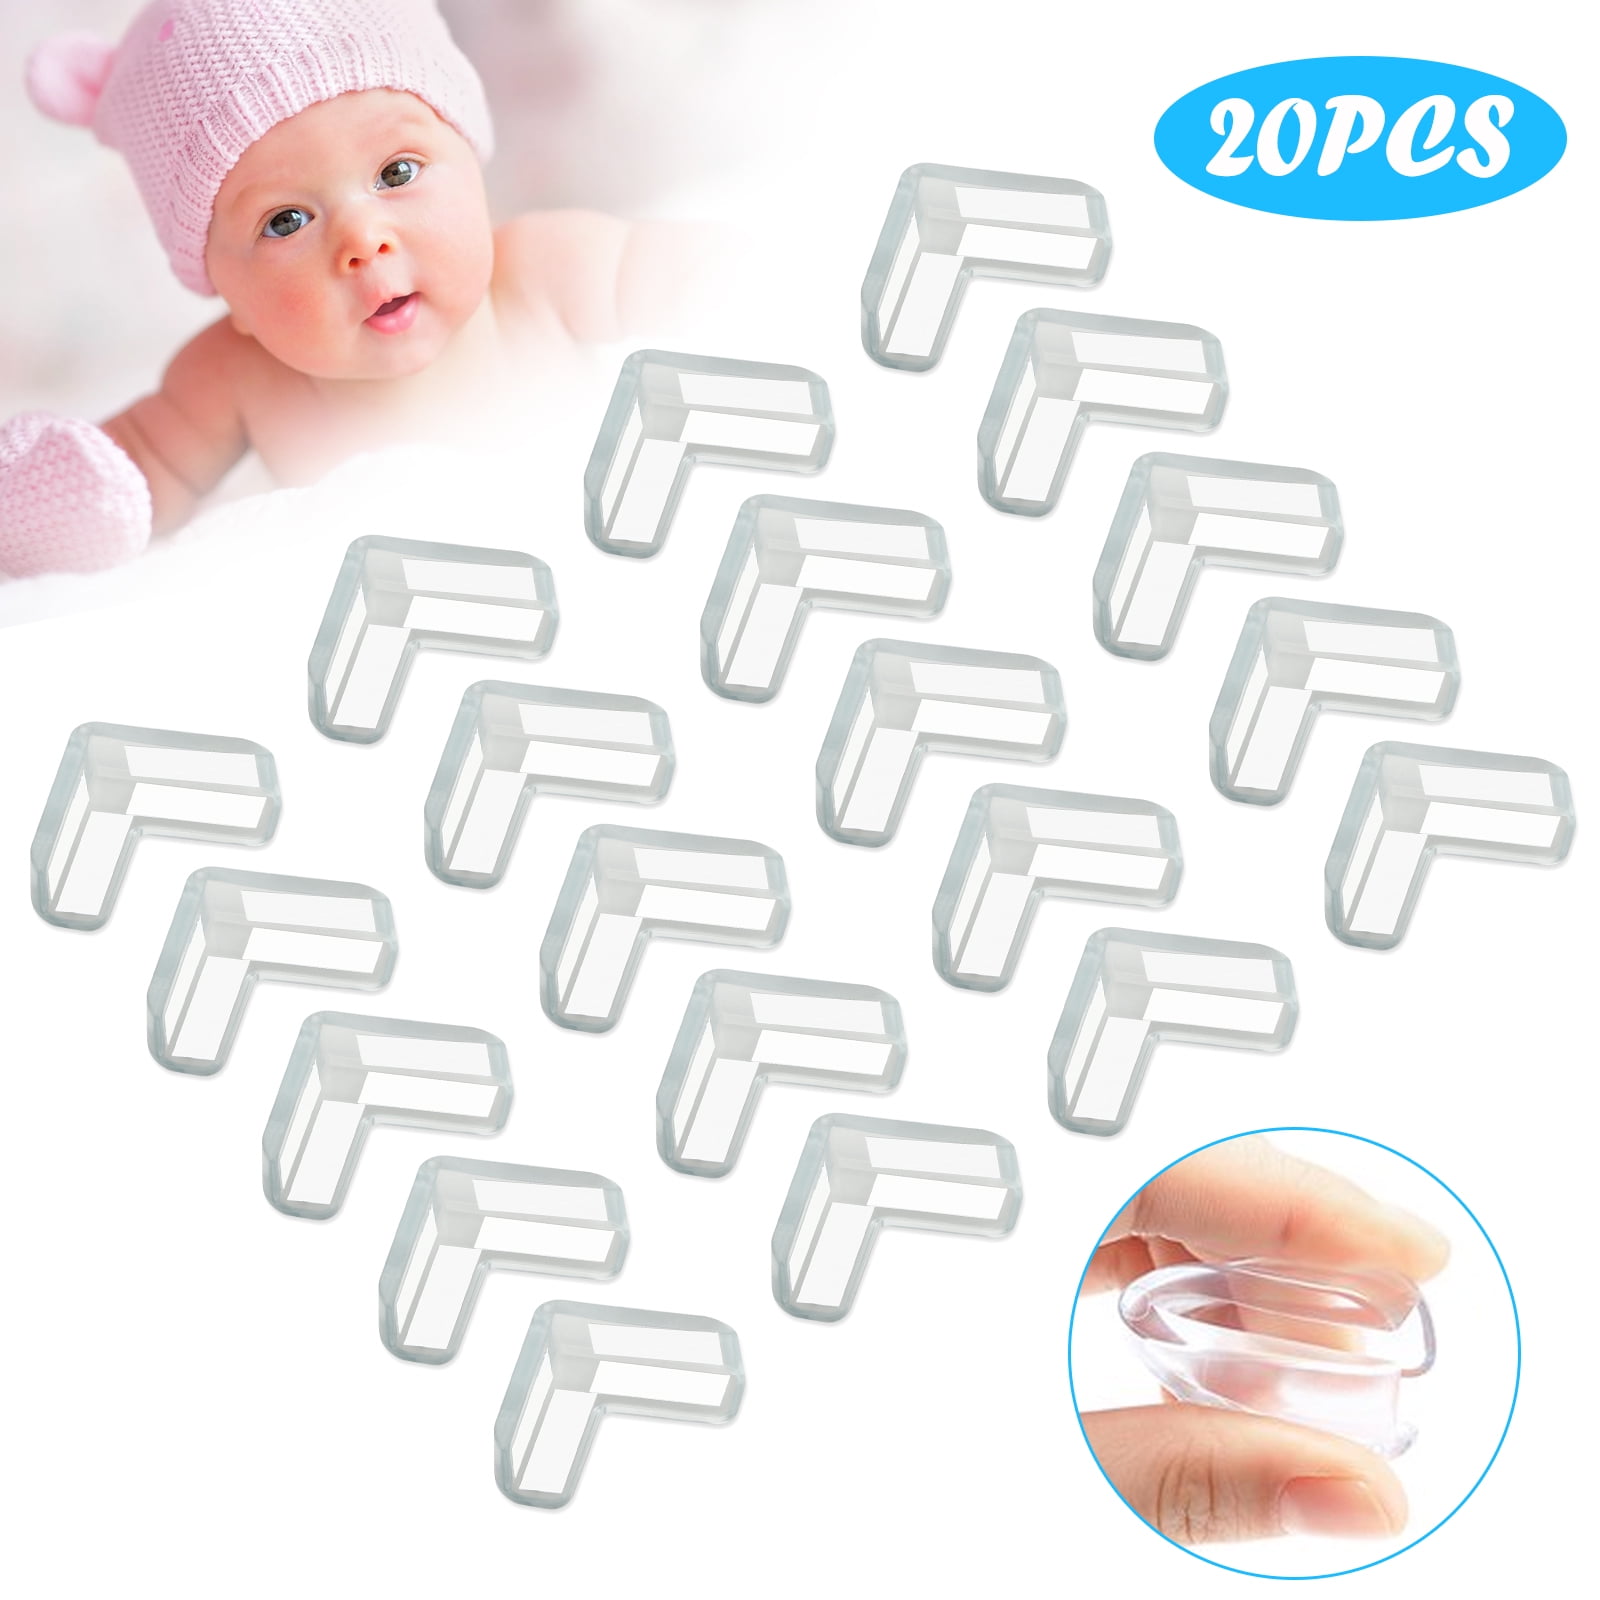 20pcs Baby safety products children's rubber desk corner protector Fast 